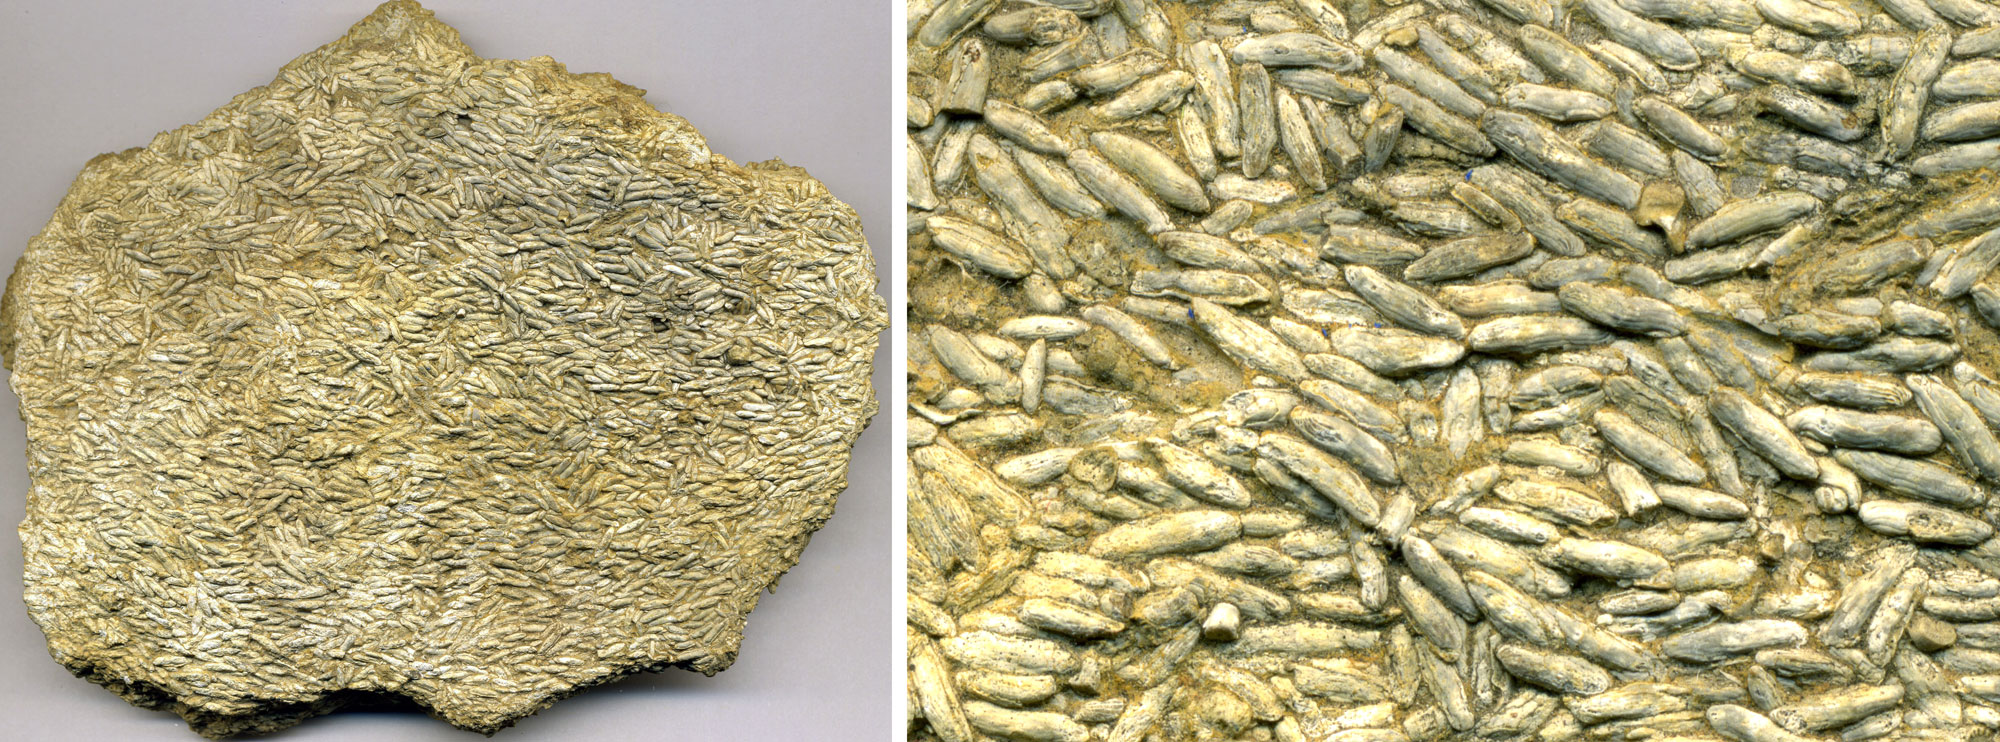 2-panel image showing photos of a rock with numerous fusilinids. The fusilinids are oblong. Panel 1: Rock sample. Panel 2: Detail of the same rock surface.